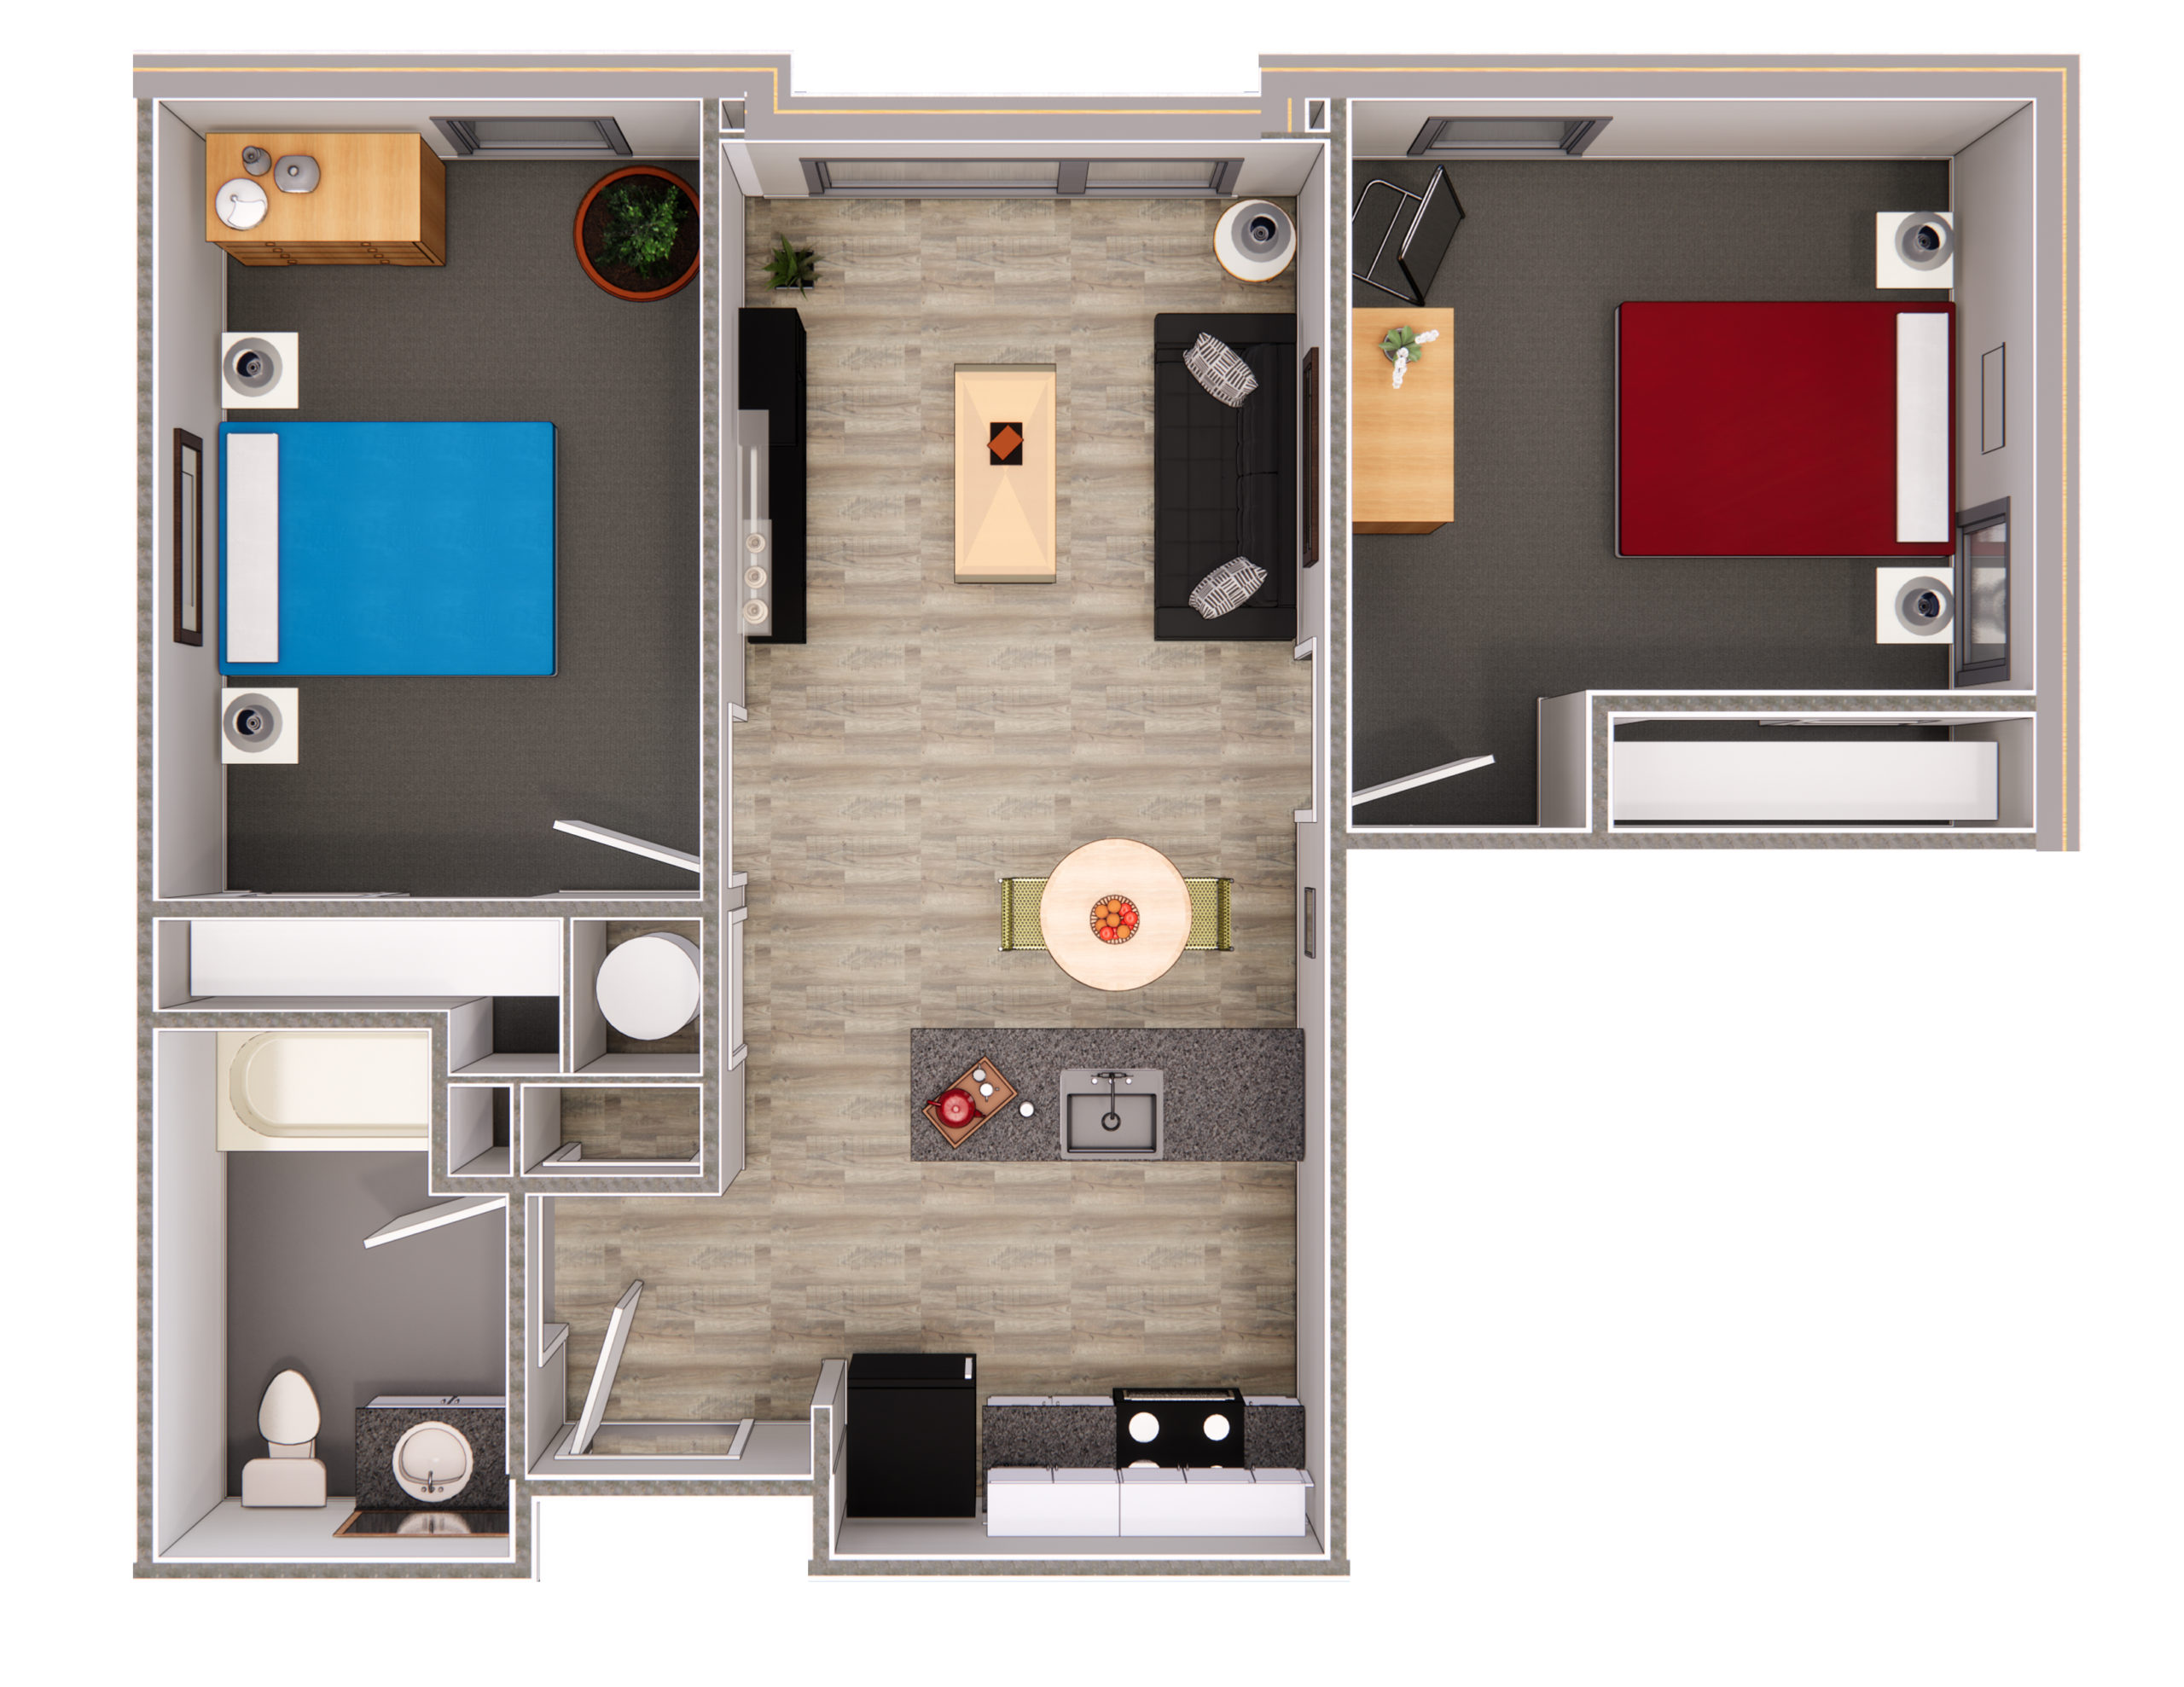 Two-bedroom layout